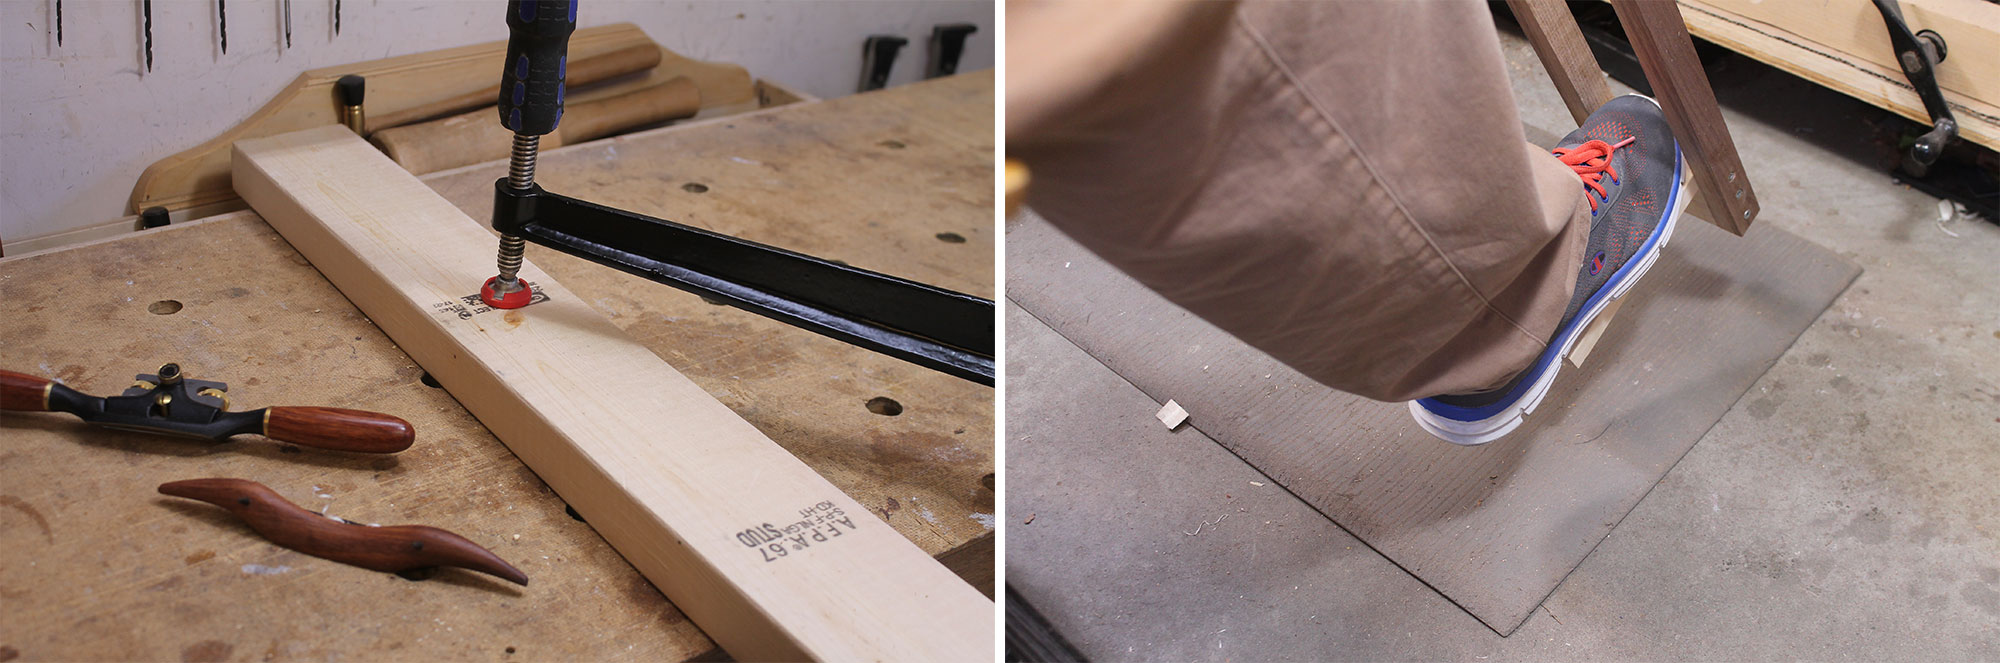 Left: Securing the beam on the bench. Right: Foot pushing the pedal.